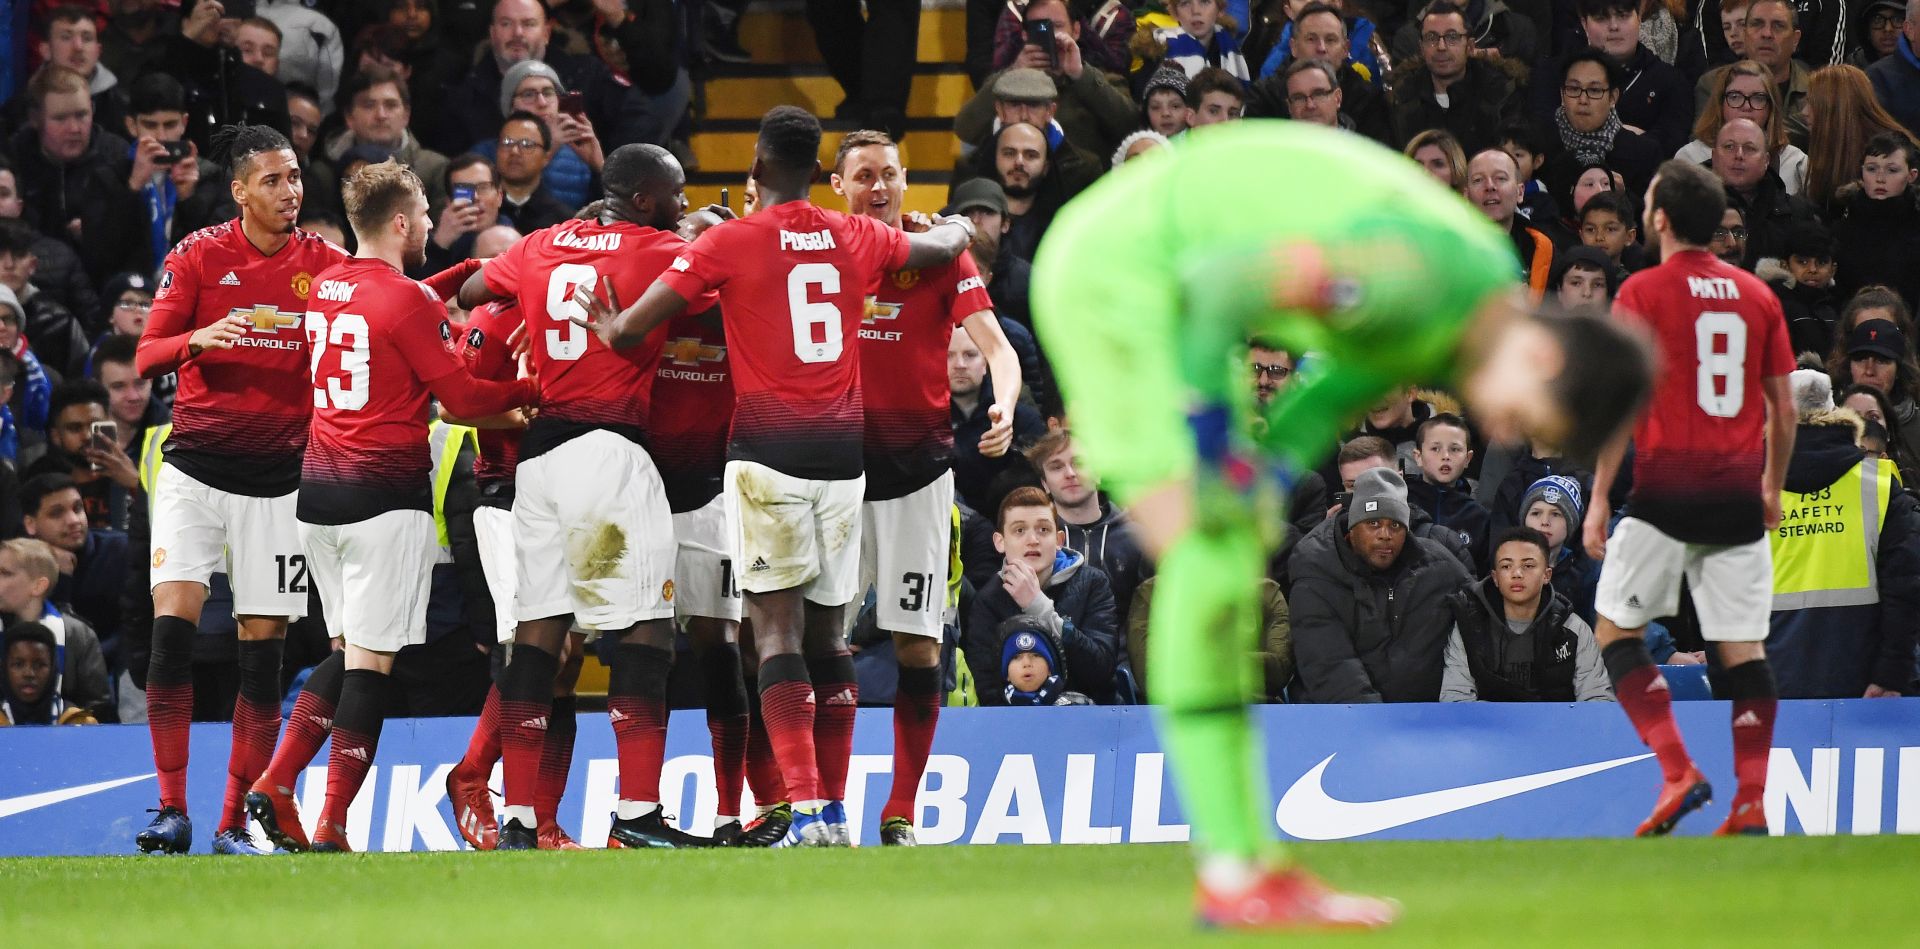 epa07379409 Player of Manchester United celebrate a goal of Ander Herrera (not pictured) during the English FA Cup 5th round soccer match between Chelsea FC and Manchester United in London, Britain, 18 February 2019.  EPA/ANDY RAIN EDITORIAL USE ONLY. No use with unauthorized audio, video, data, fixture lists, club/league logos or 'live' services. Online in-match use limited to 120 images, no video emulation. No use in betting, games or single club/league/player publications.